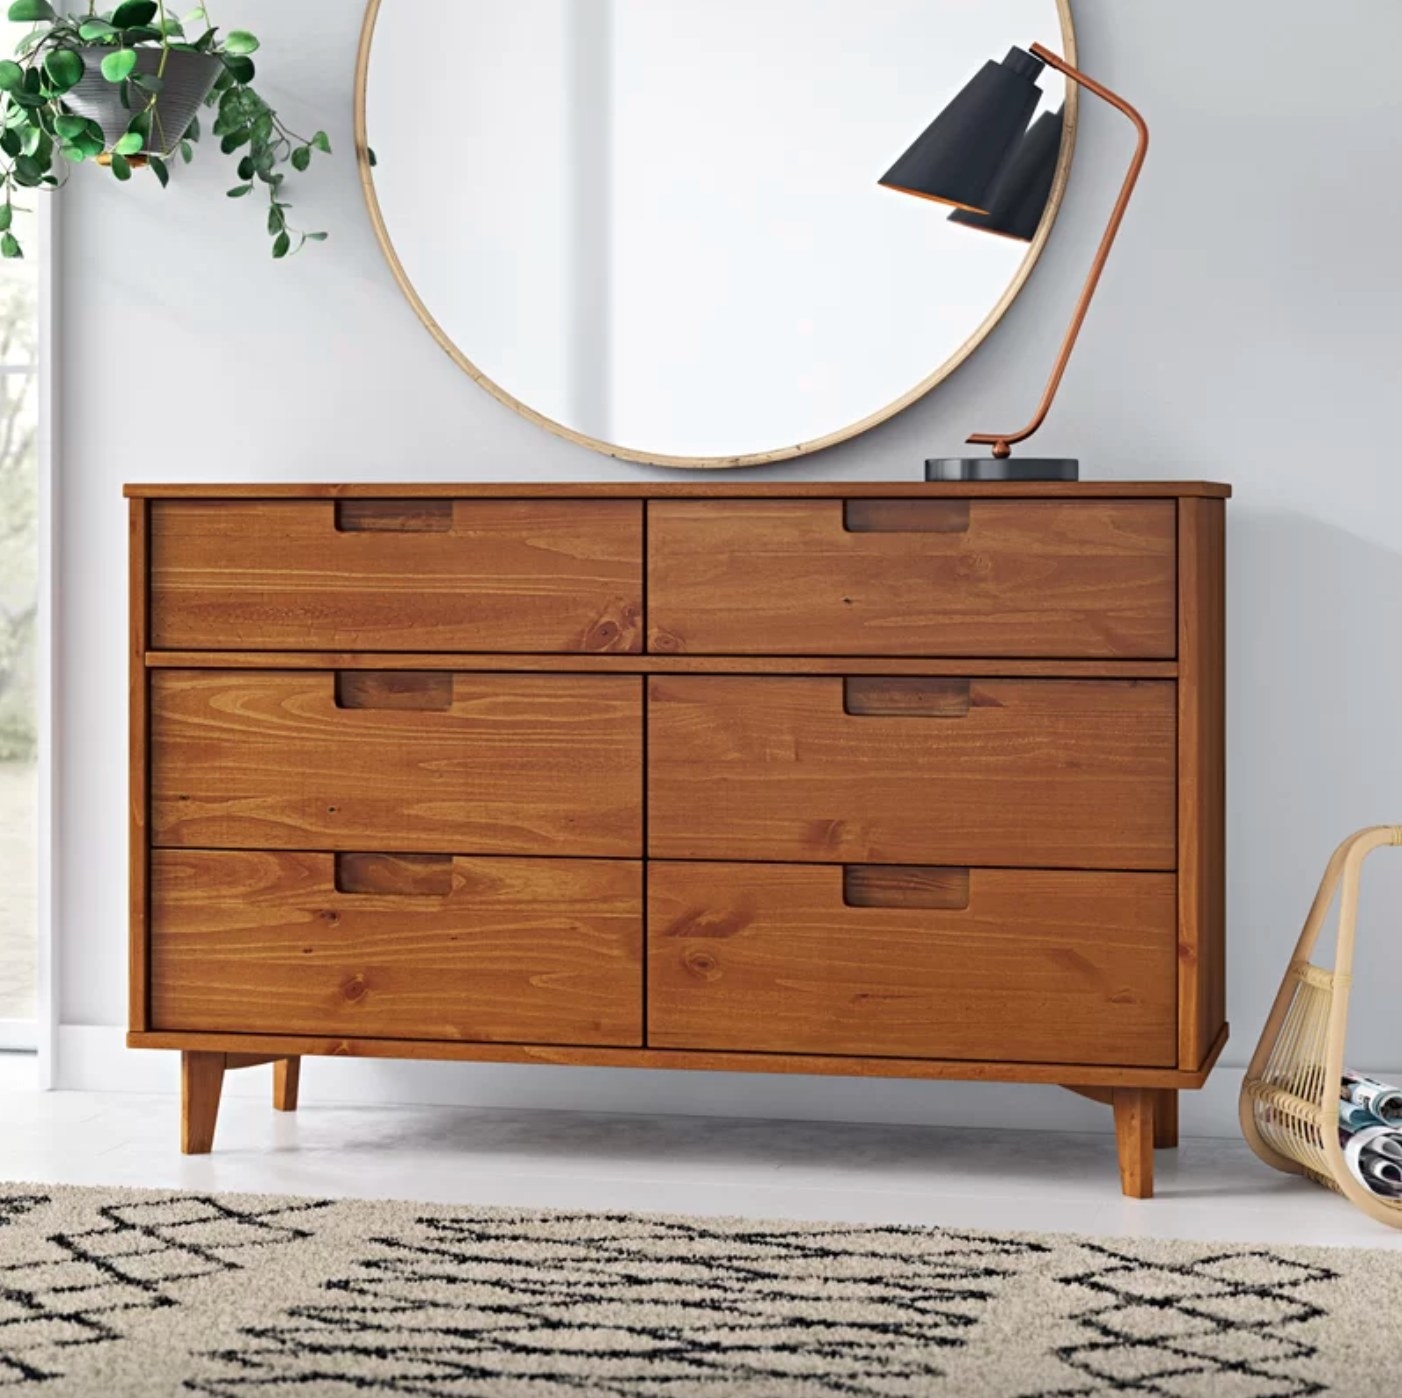 The six drawer double dresser in caramel